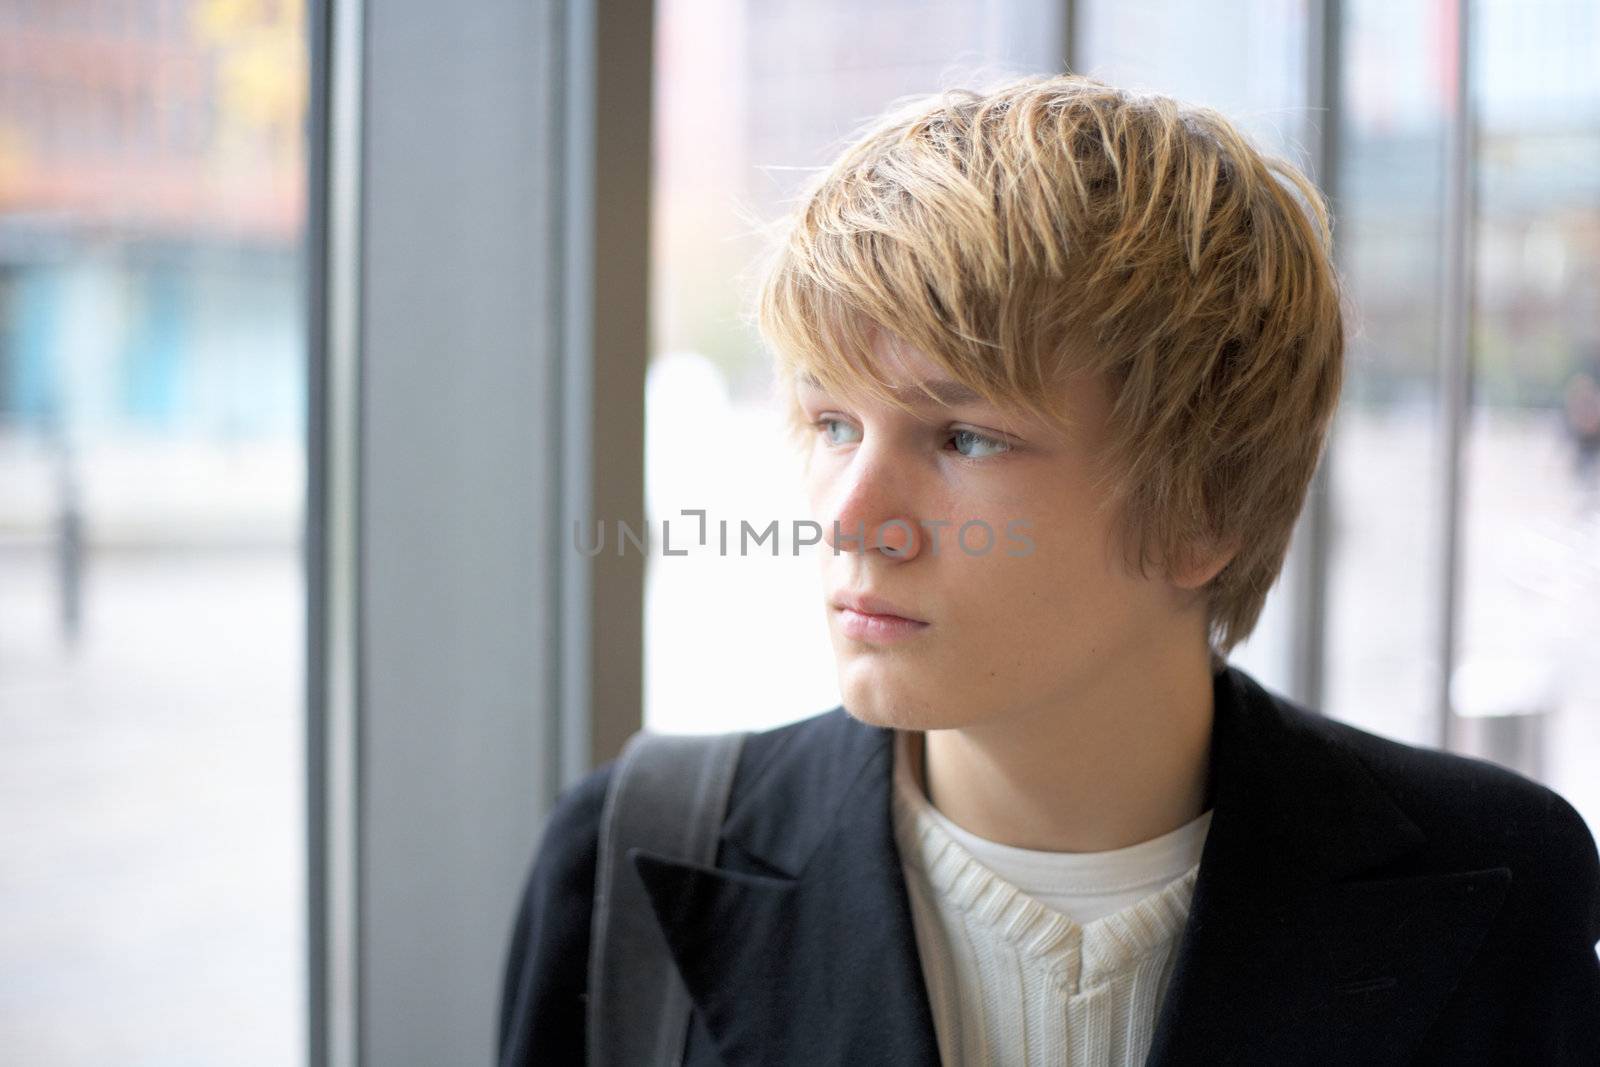 Teenage boy looking out window in urban environment, interior